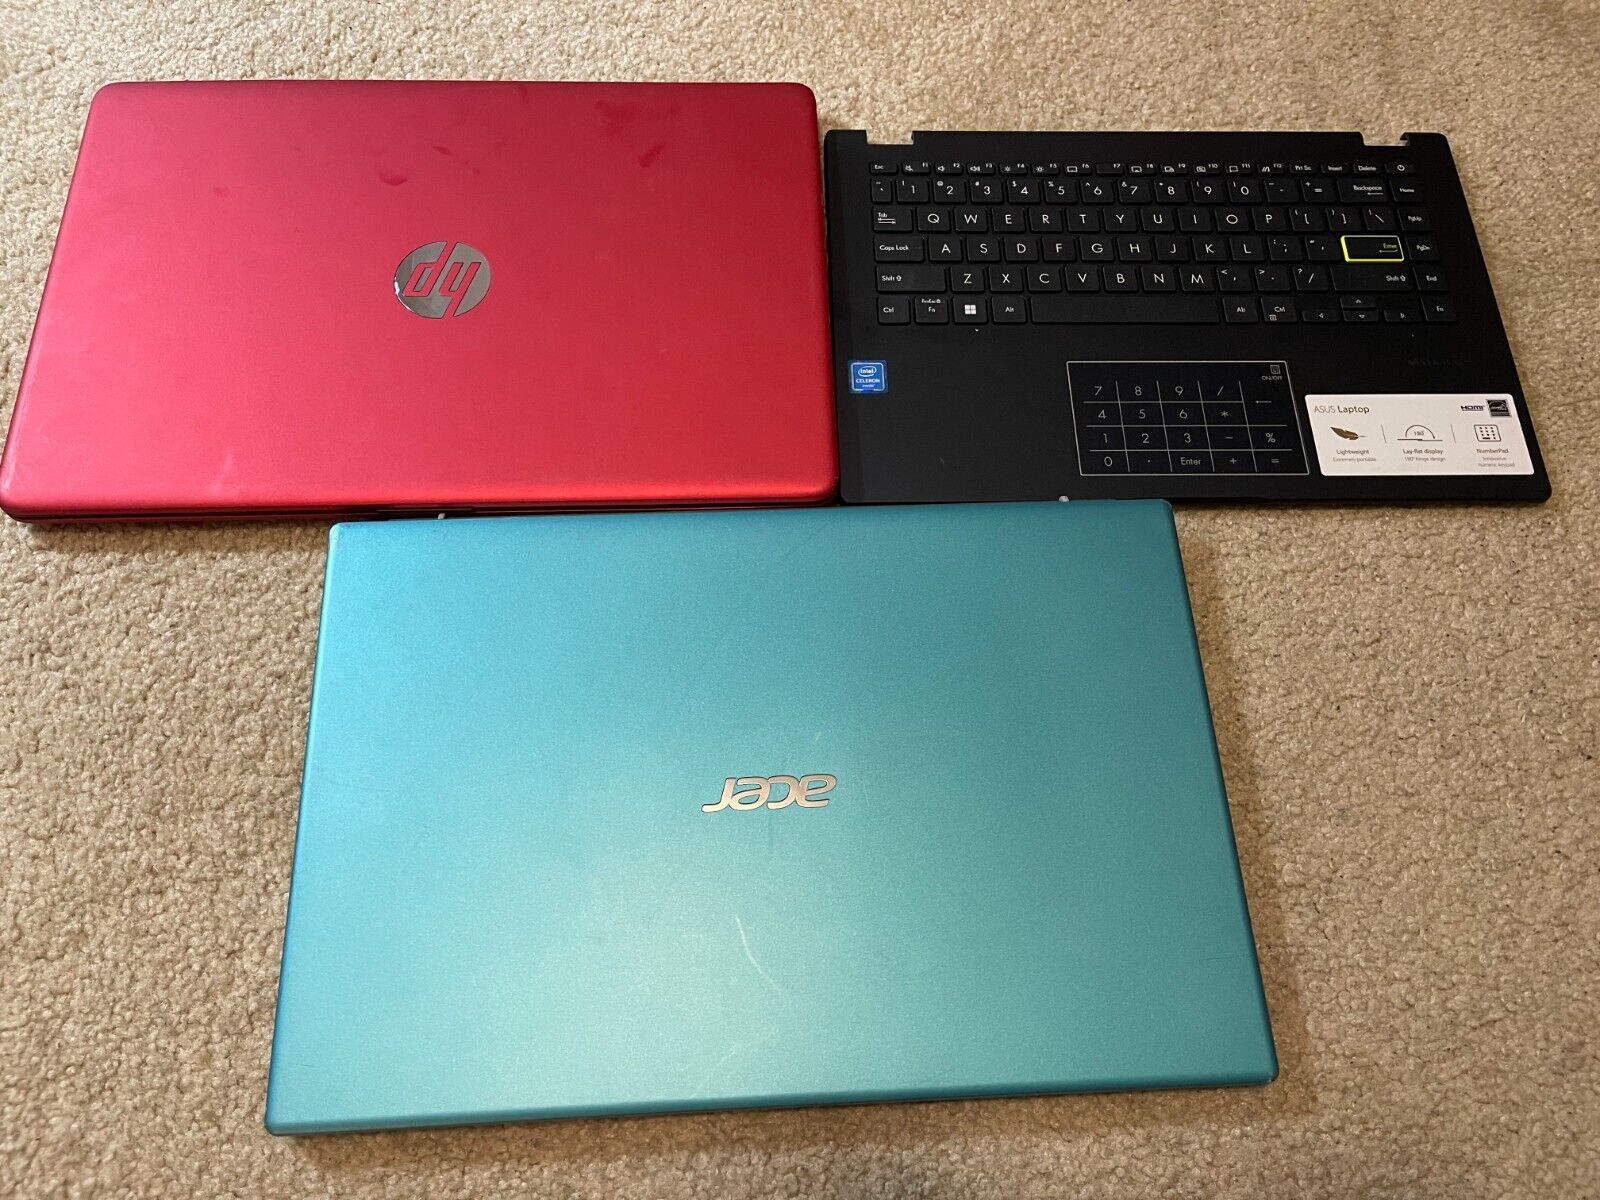 Lot of 3 Laptops, 1x Acer, 1x HP, 1x Asus - As Is For Parts